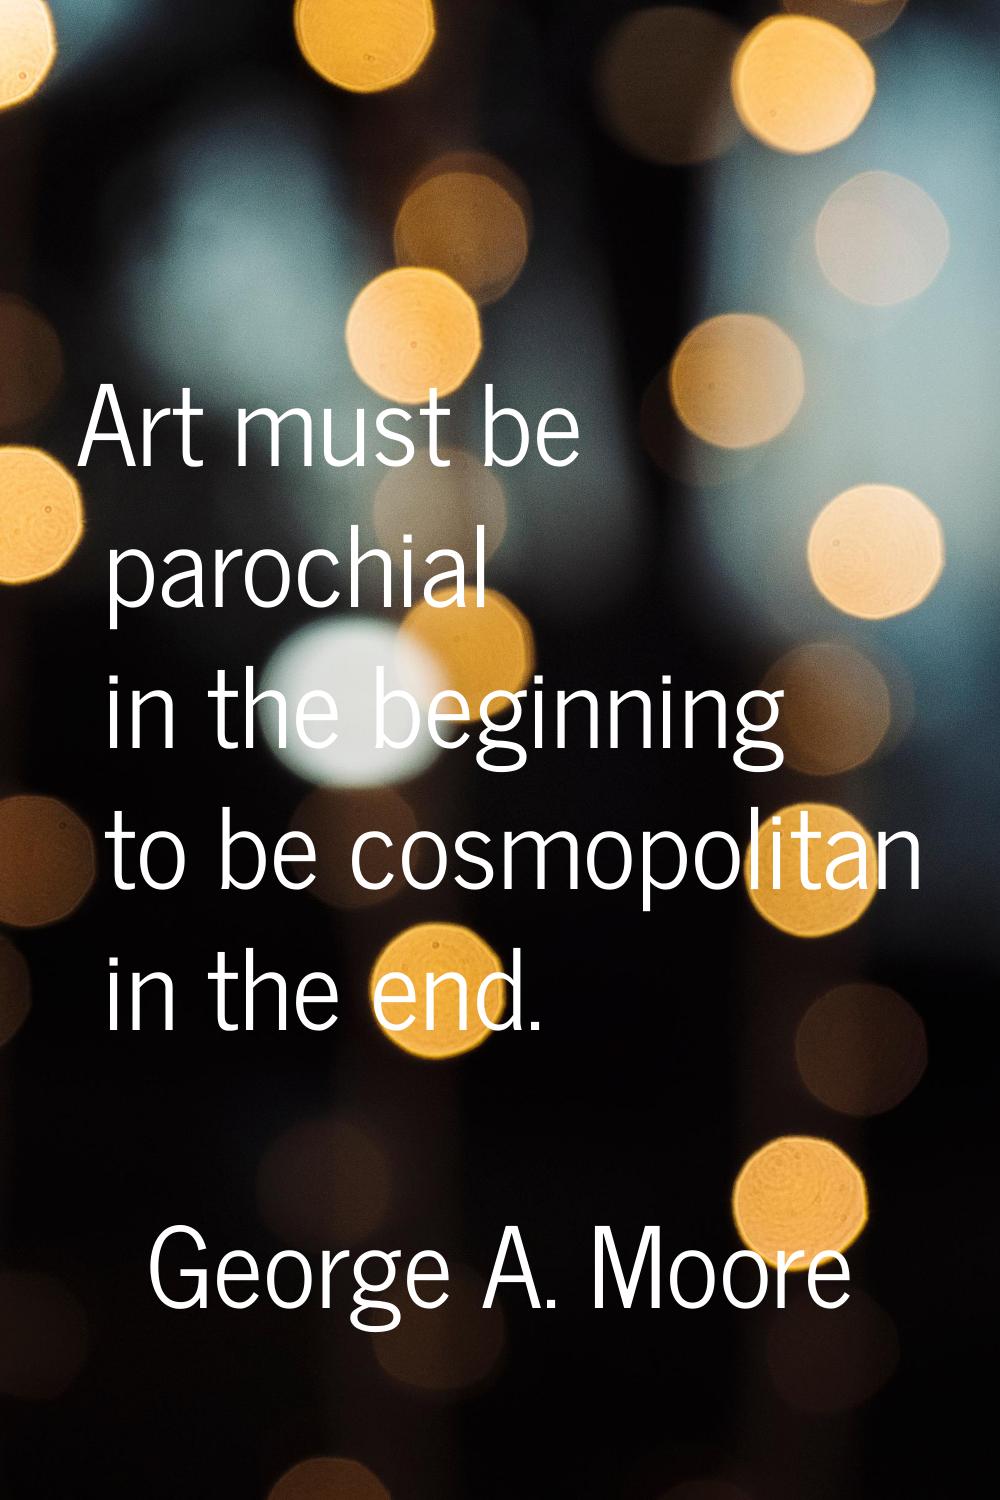 Art must be parochial in the beginning to be cosmopolitan in the end.